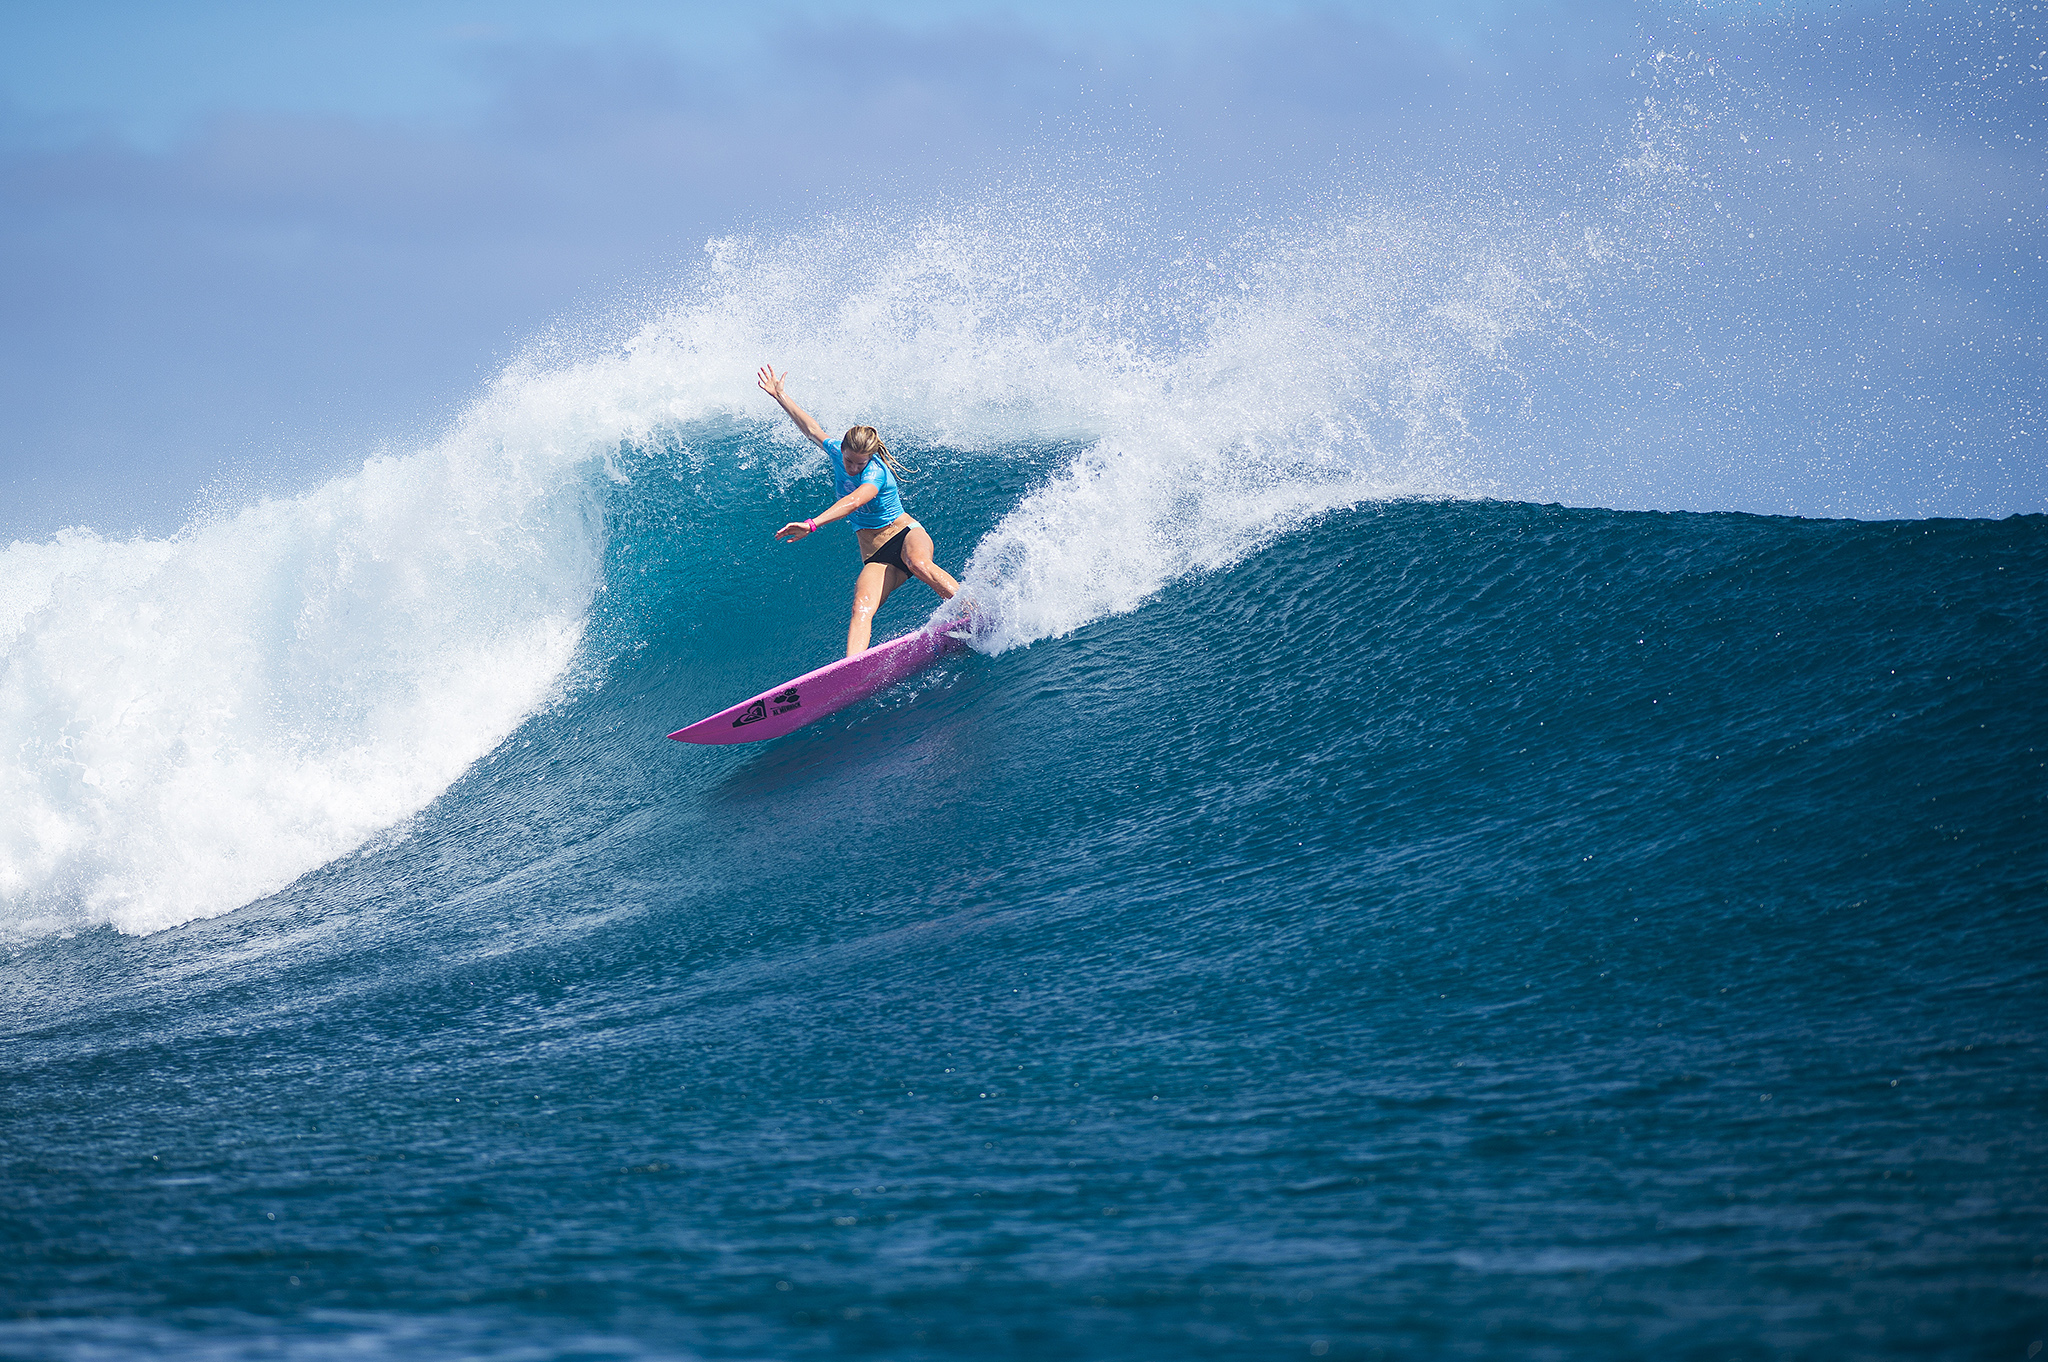 Bianca Buitendag of Victoria Bay, South Africa (pictured) posting one of the highest wave scores of the day, a near perfect 9.43 (out of ten) winning her Round 1 heat at the Womens Fiji Pro in Fiji on Monday June 1, 2015.